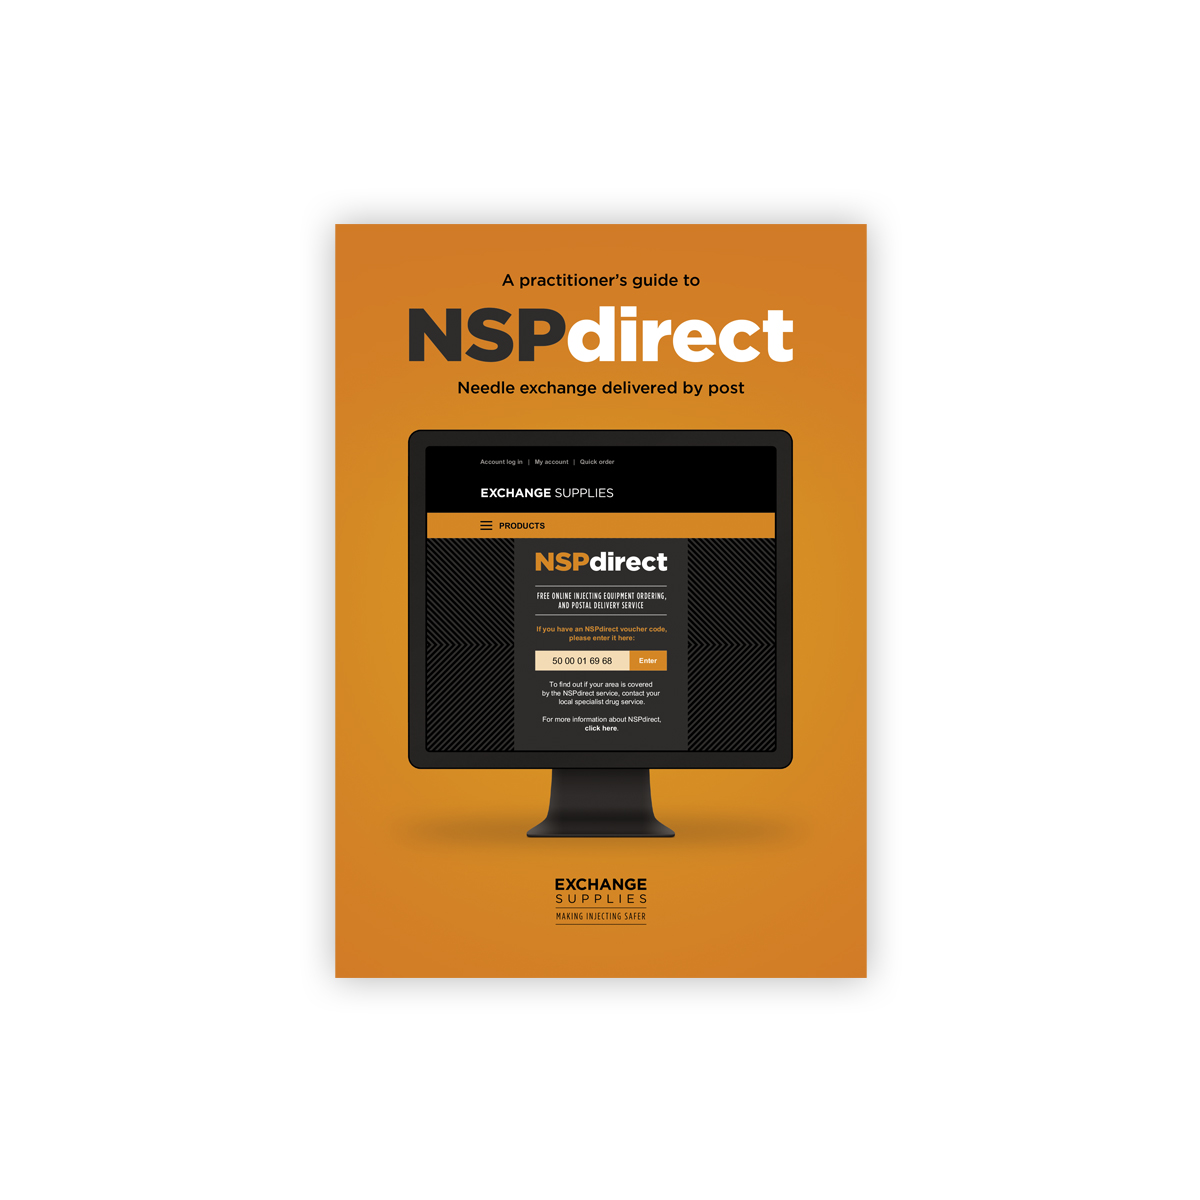 Practitioner's guide to NSPdirect